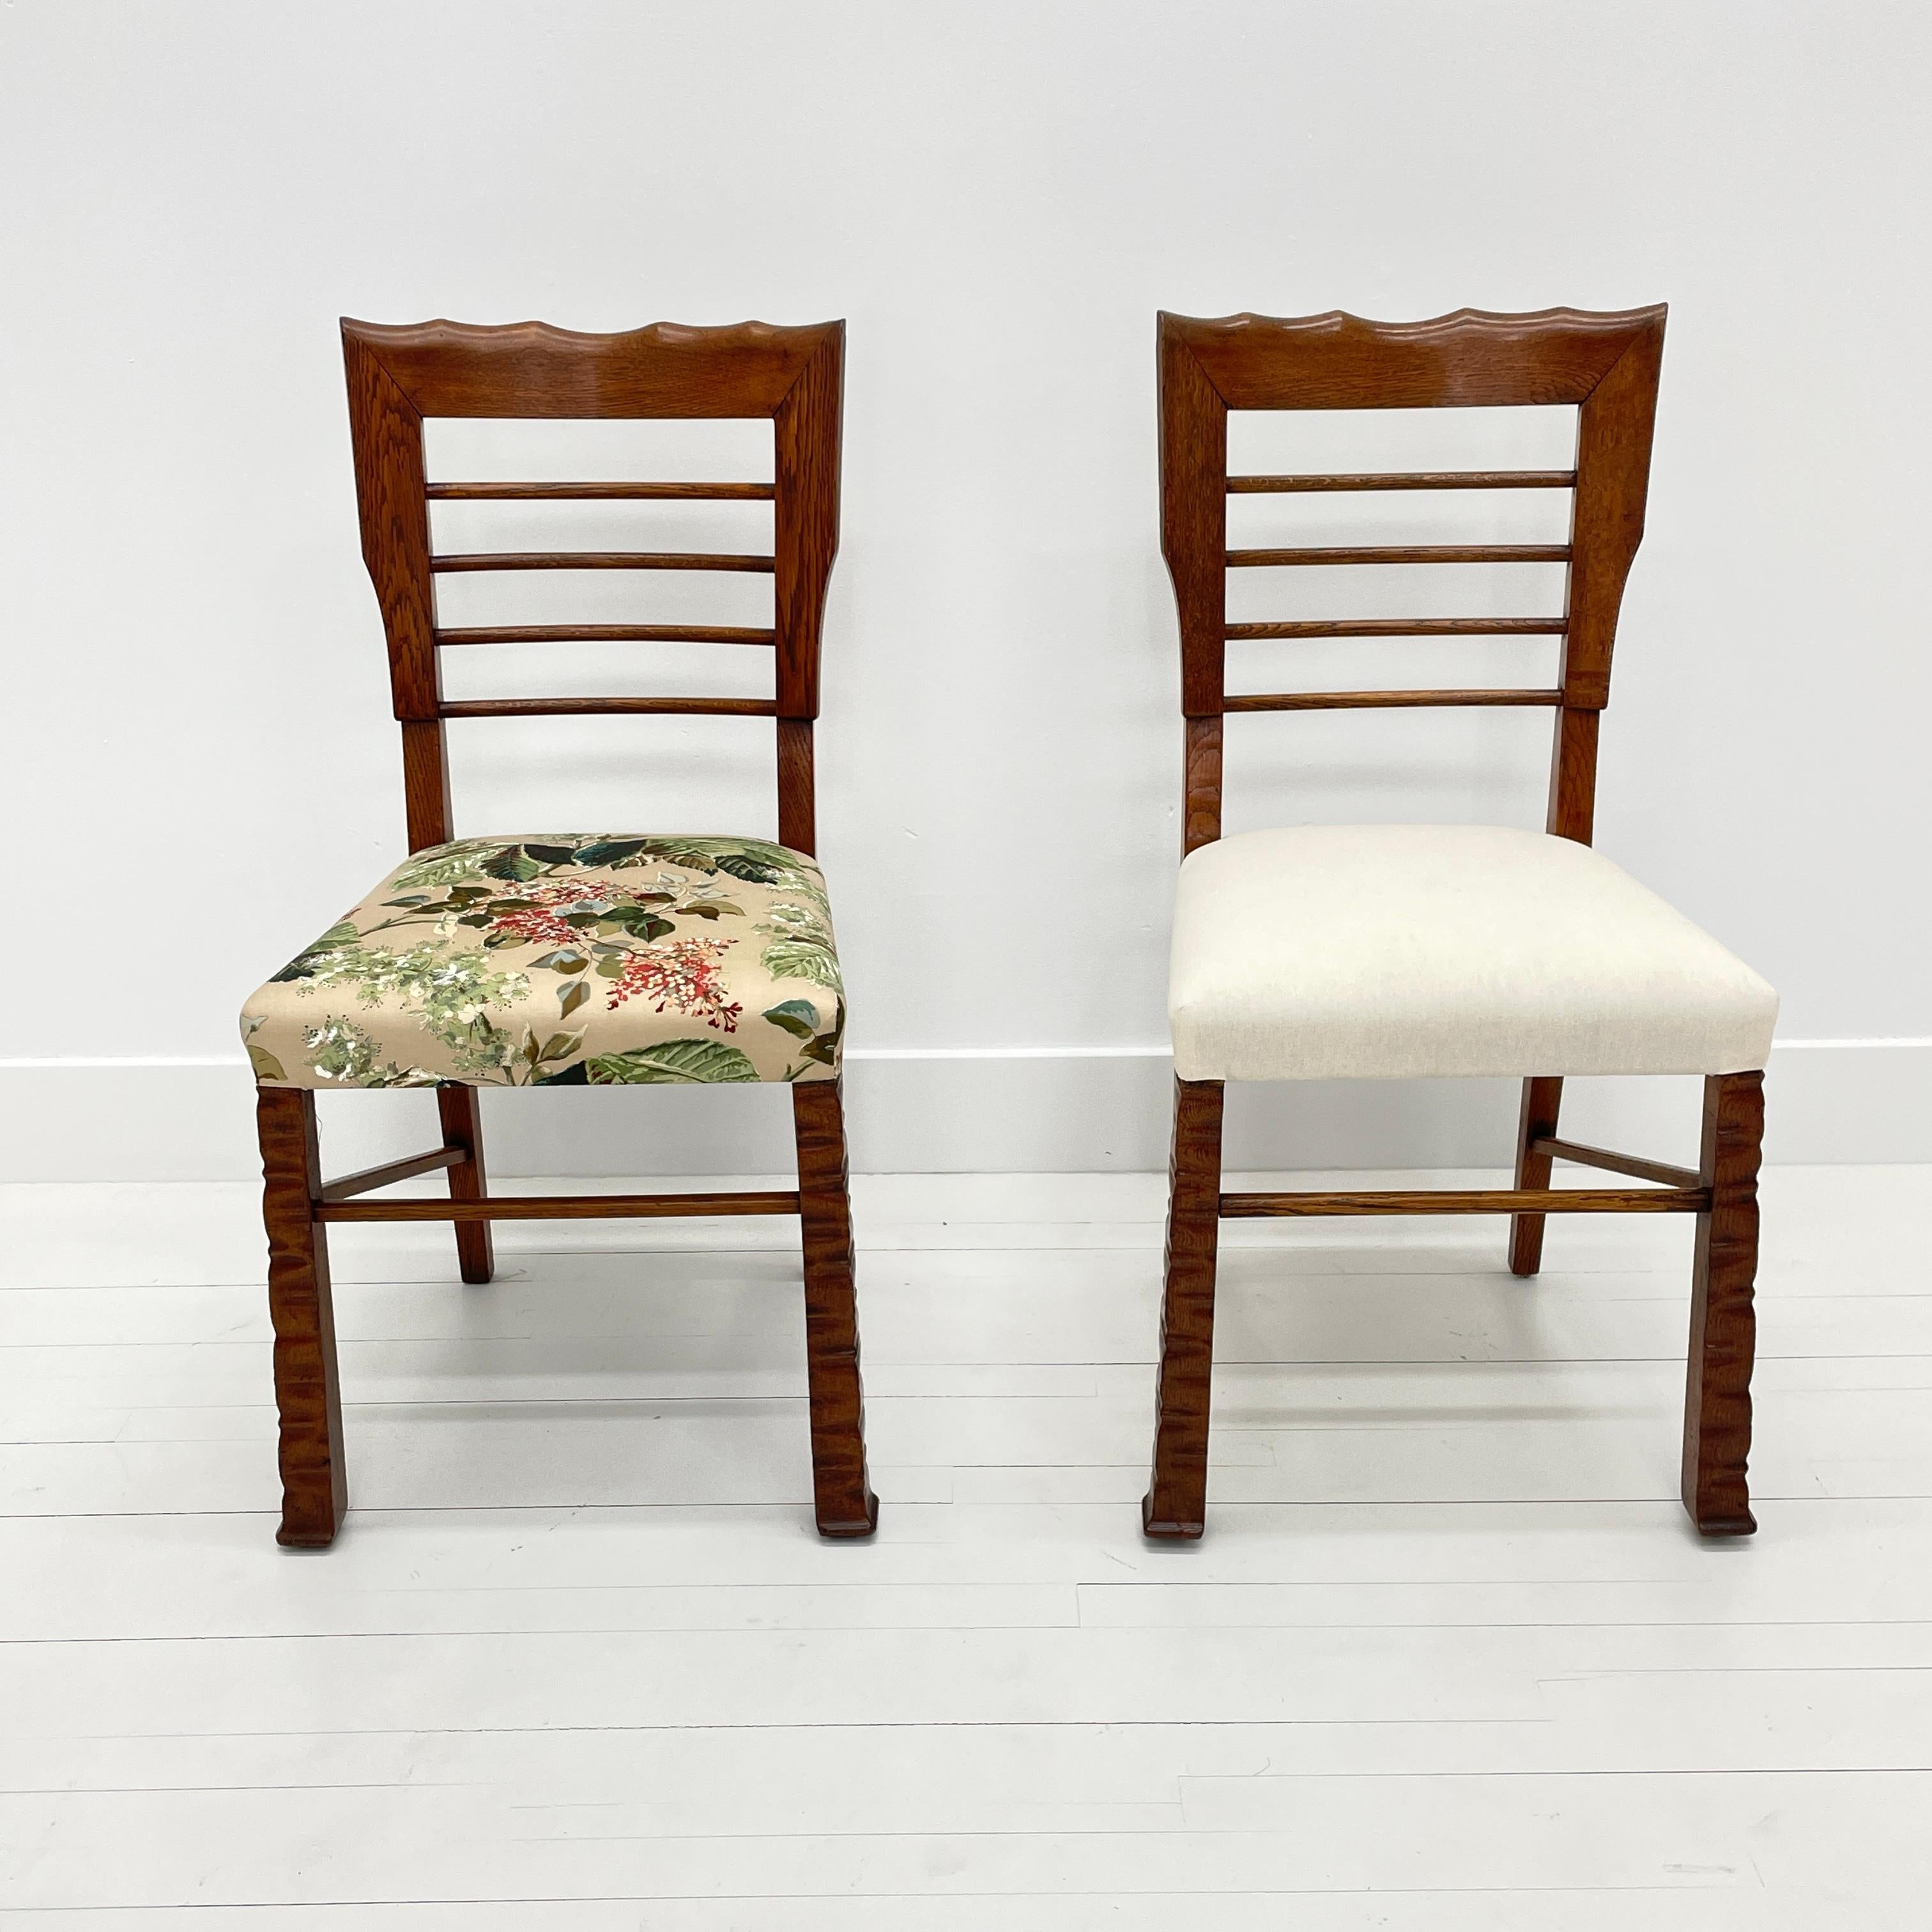 Rustic Scalloped Edge Dining Chairs, Set of 10, Italy, 1940's For Sale 10